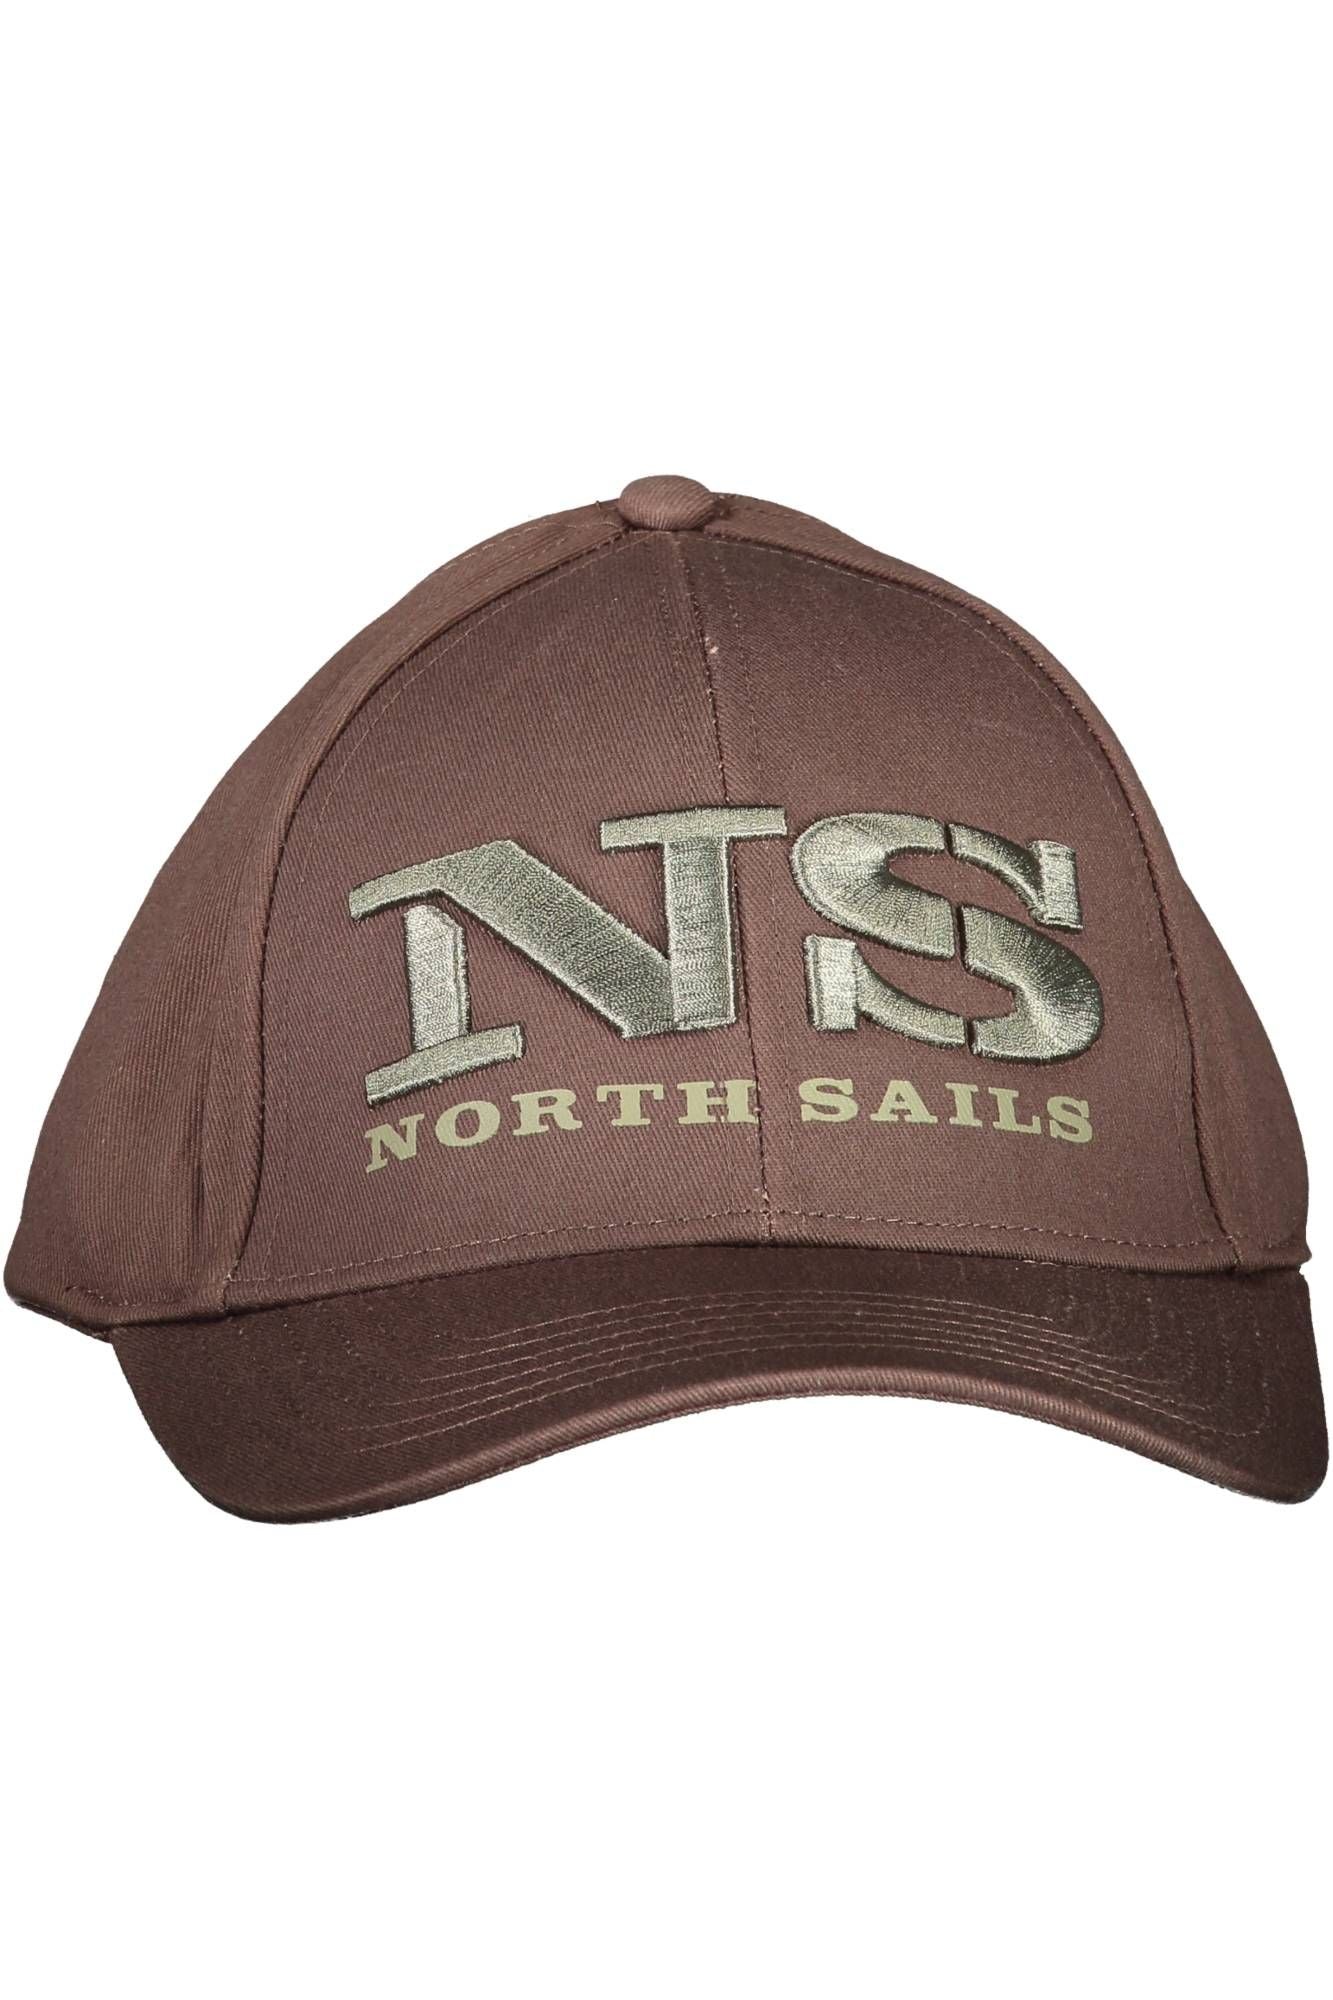 North Sails Chic Embroidered Cotton Cap with Visor